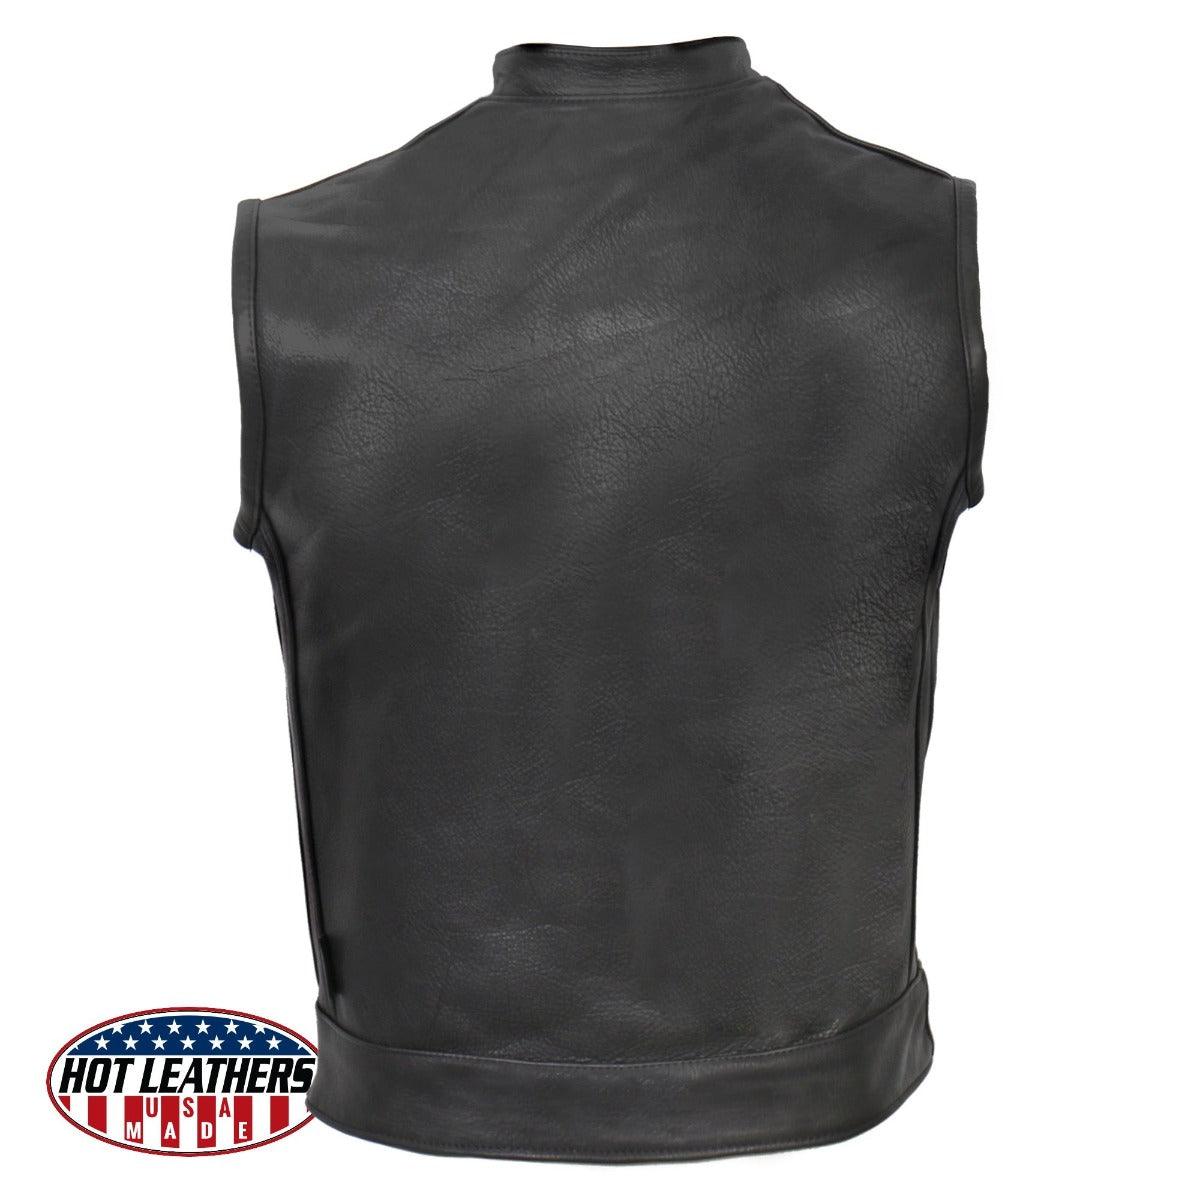 Hot Leathers Men's Usa Made Covered Zipper Premium Leather Club Vest - American Legend Rider